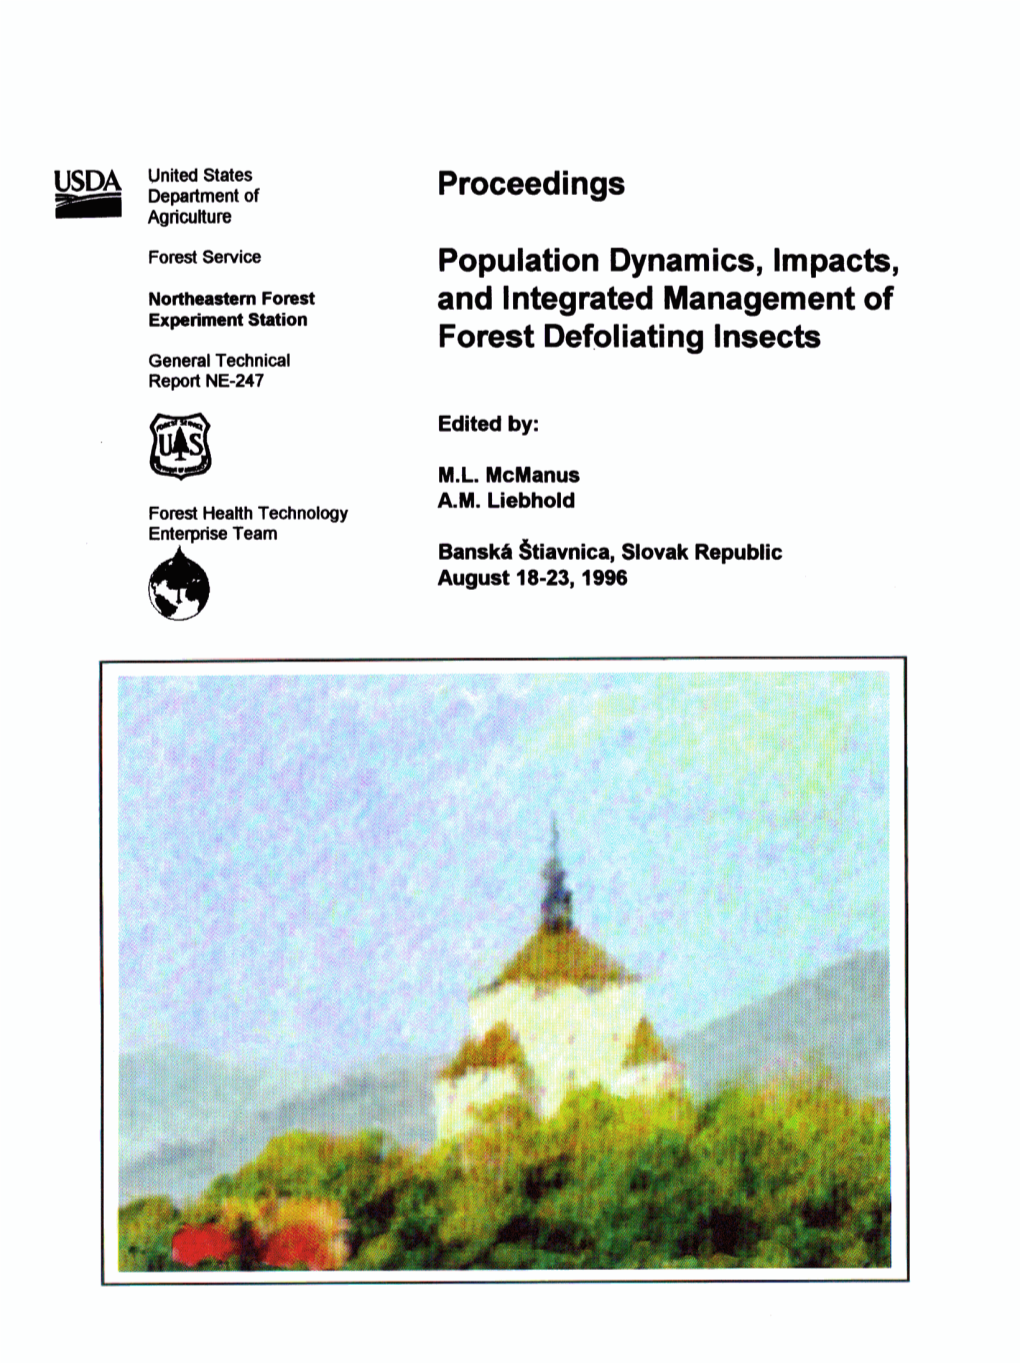 Population Dynamics, Impacts, and Integrated Management of Forest Defoliation Insects